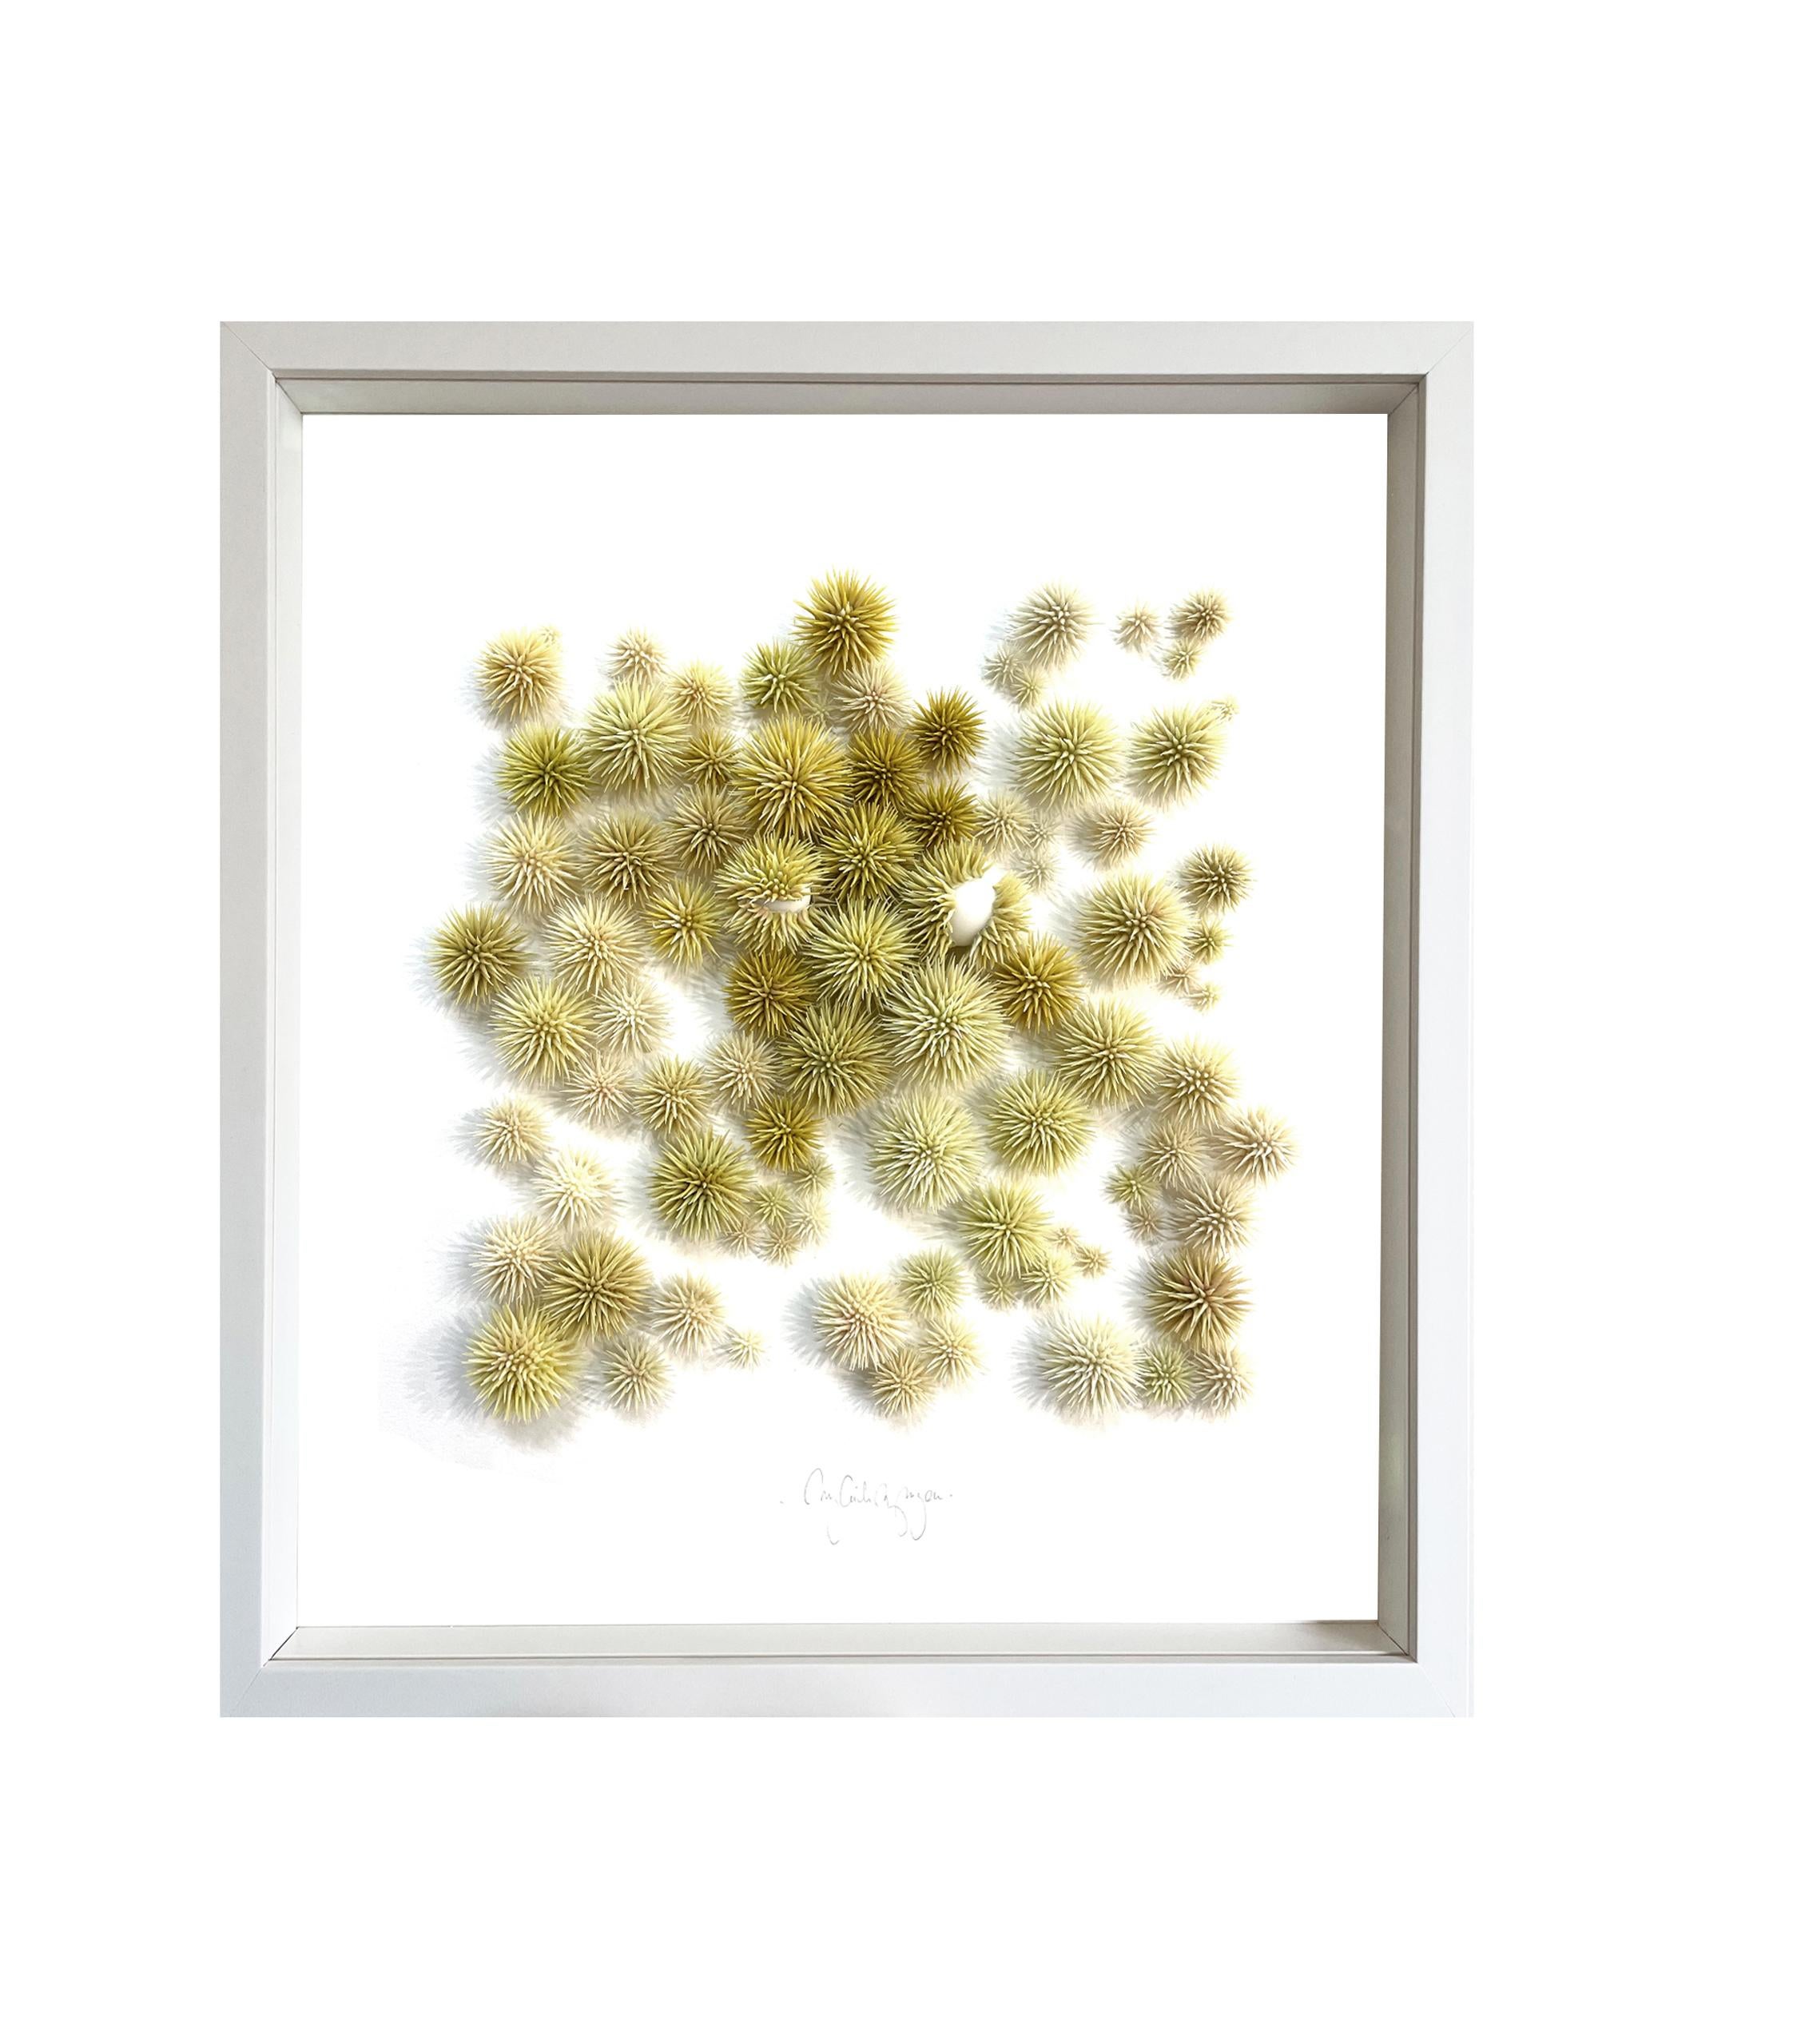 Sea Urchins - abstract nature inspired framed minimal collage of clay on paper